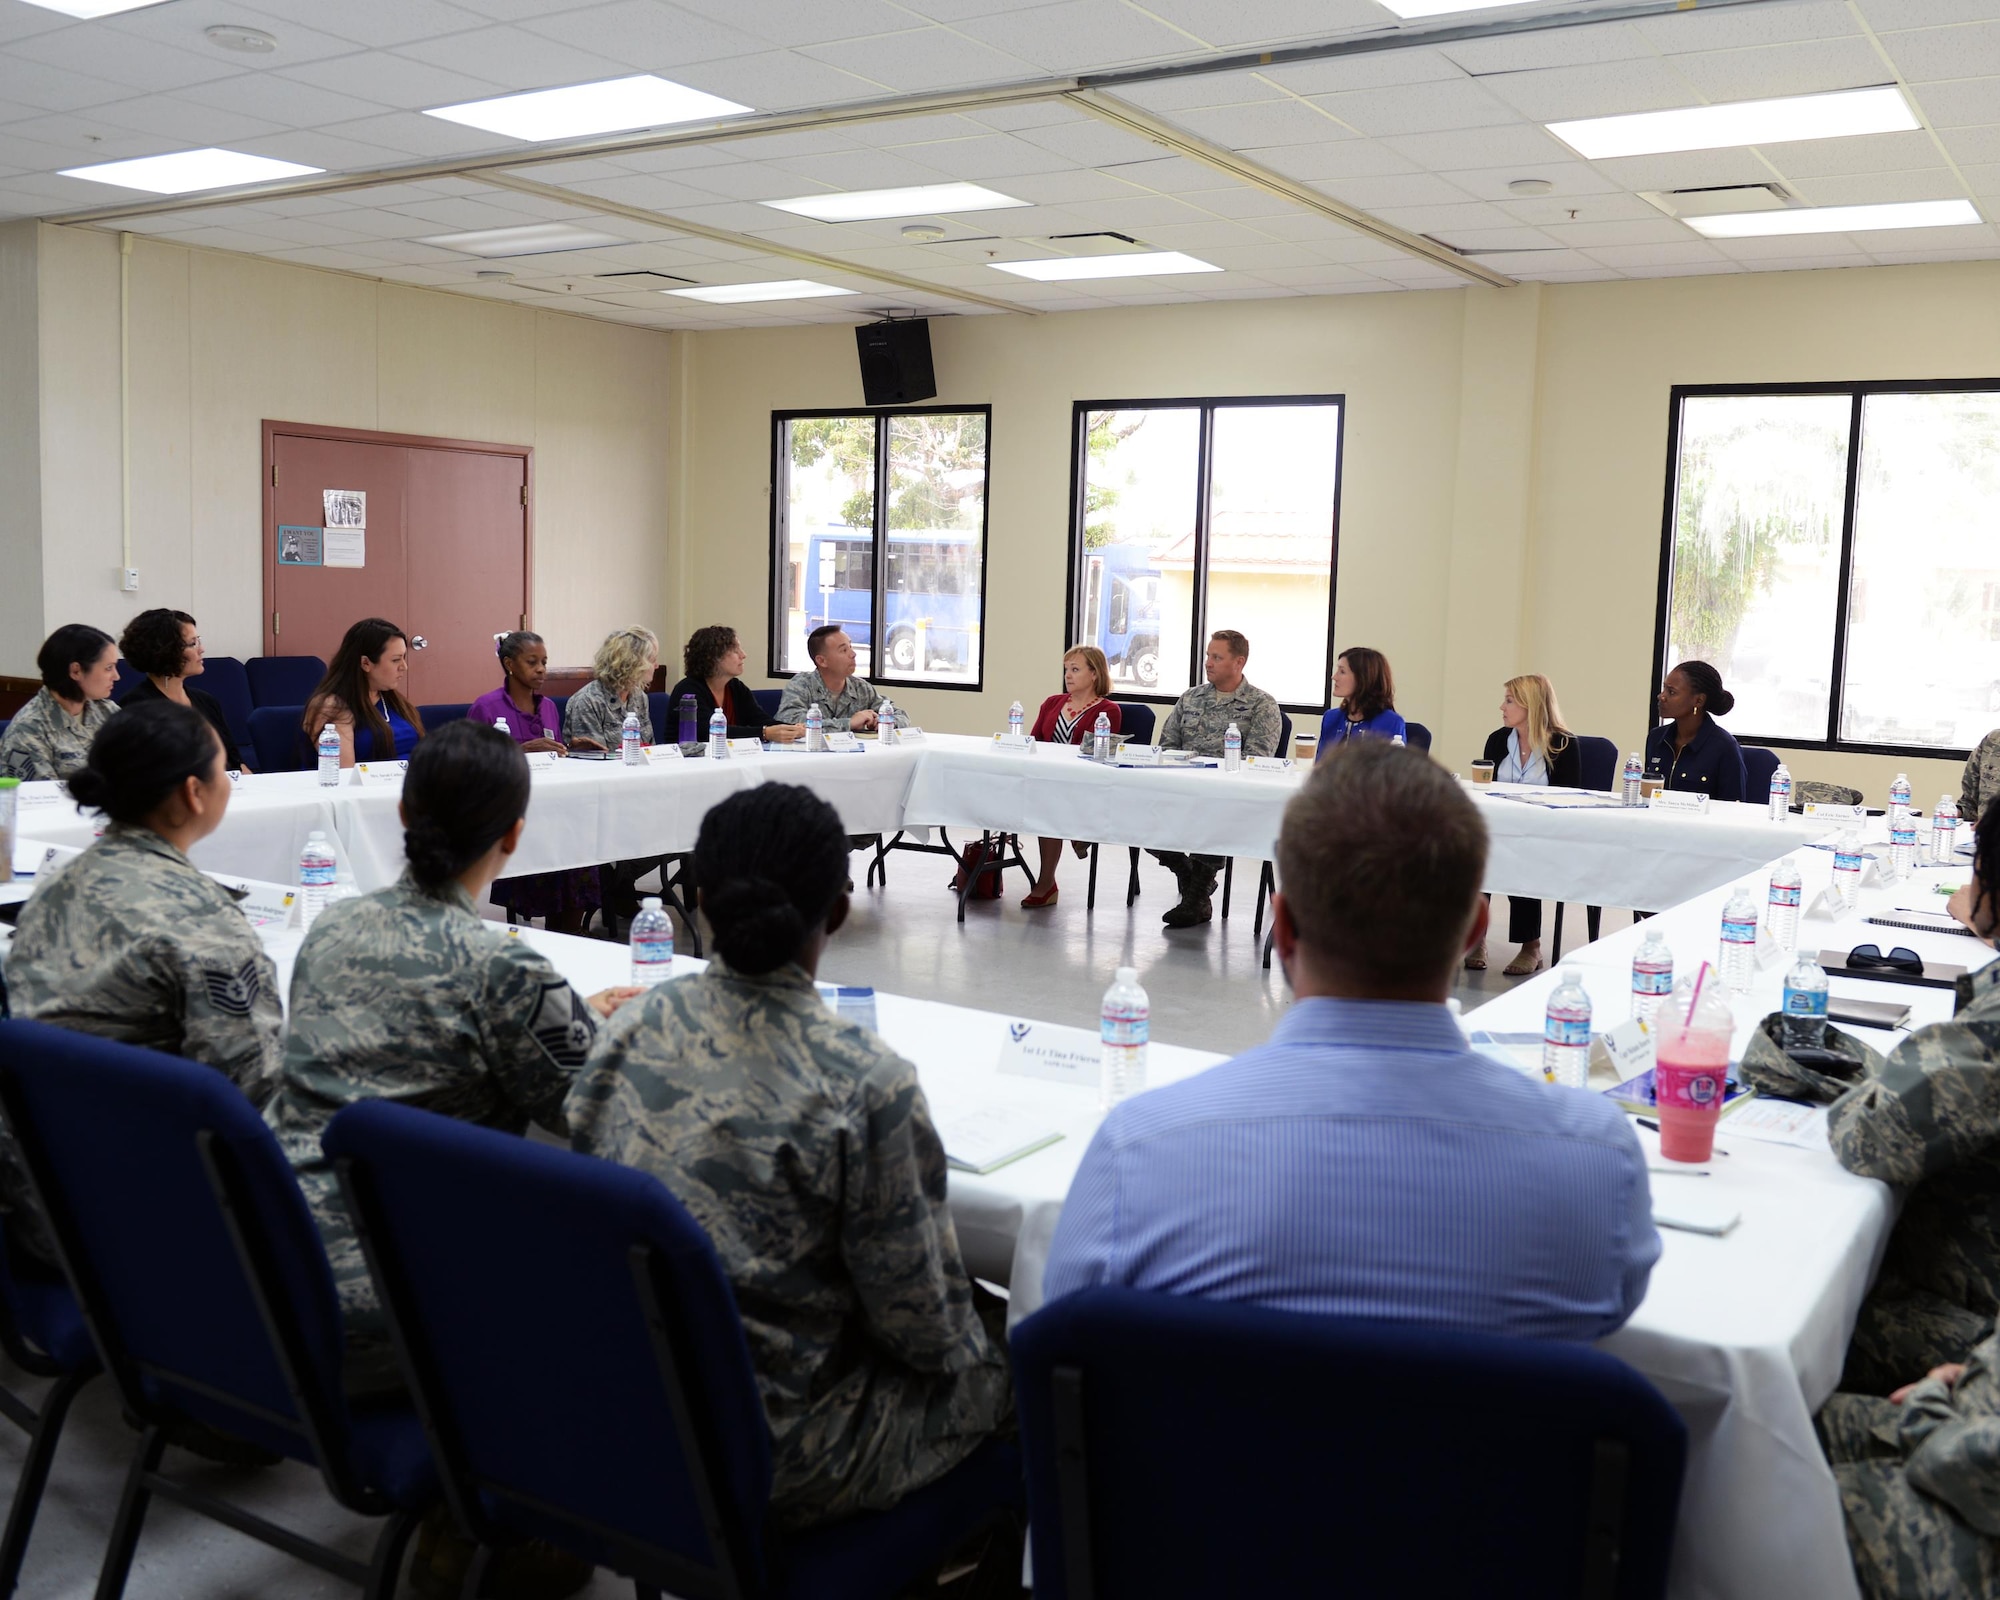 Betty Welsh, spouse of Air Force Chief of Staff Gen. Mark A. Welsh III, speaks with organization leaders during a round table discussion Jan. 21, 2016, at Andersen Air Force Base, Guam. During the discussion, the leaders explained their programs and how its benefits Andersen Airmen and their families. (U.S. Air Force photo/Senior Airman Ciera Presentado)